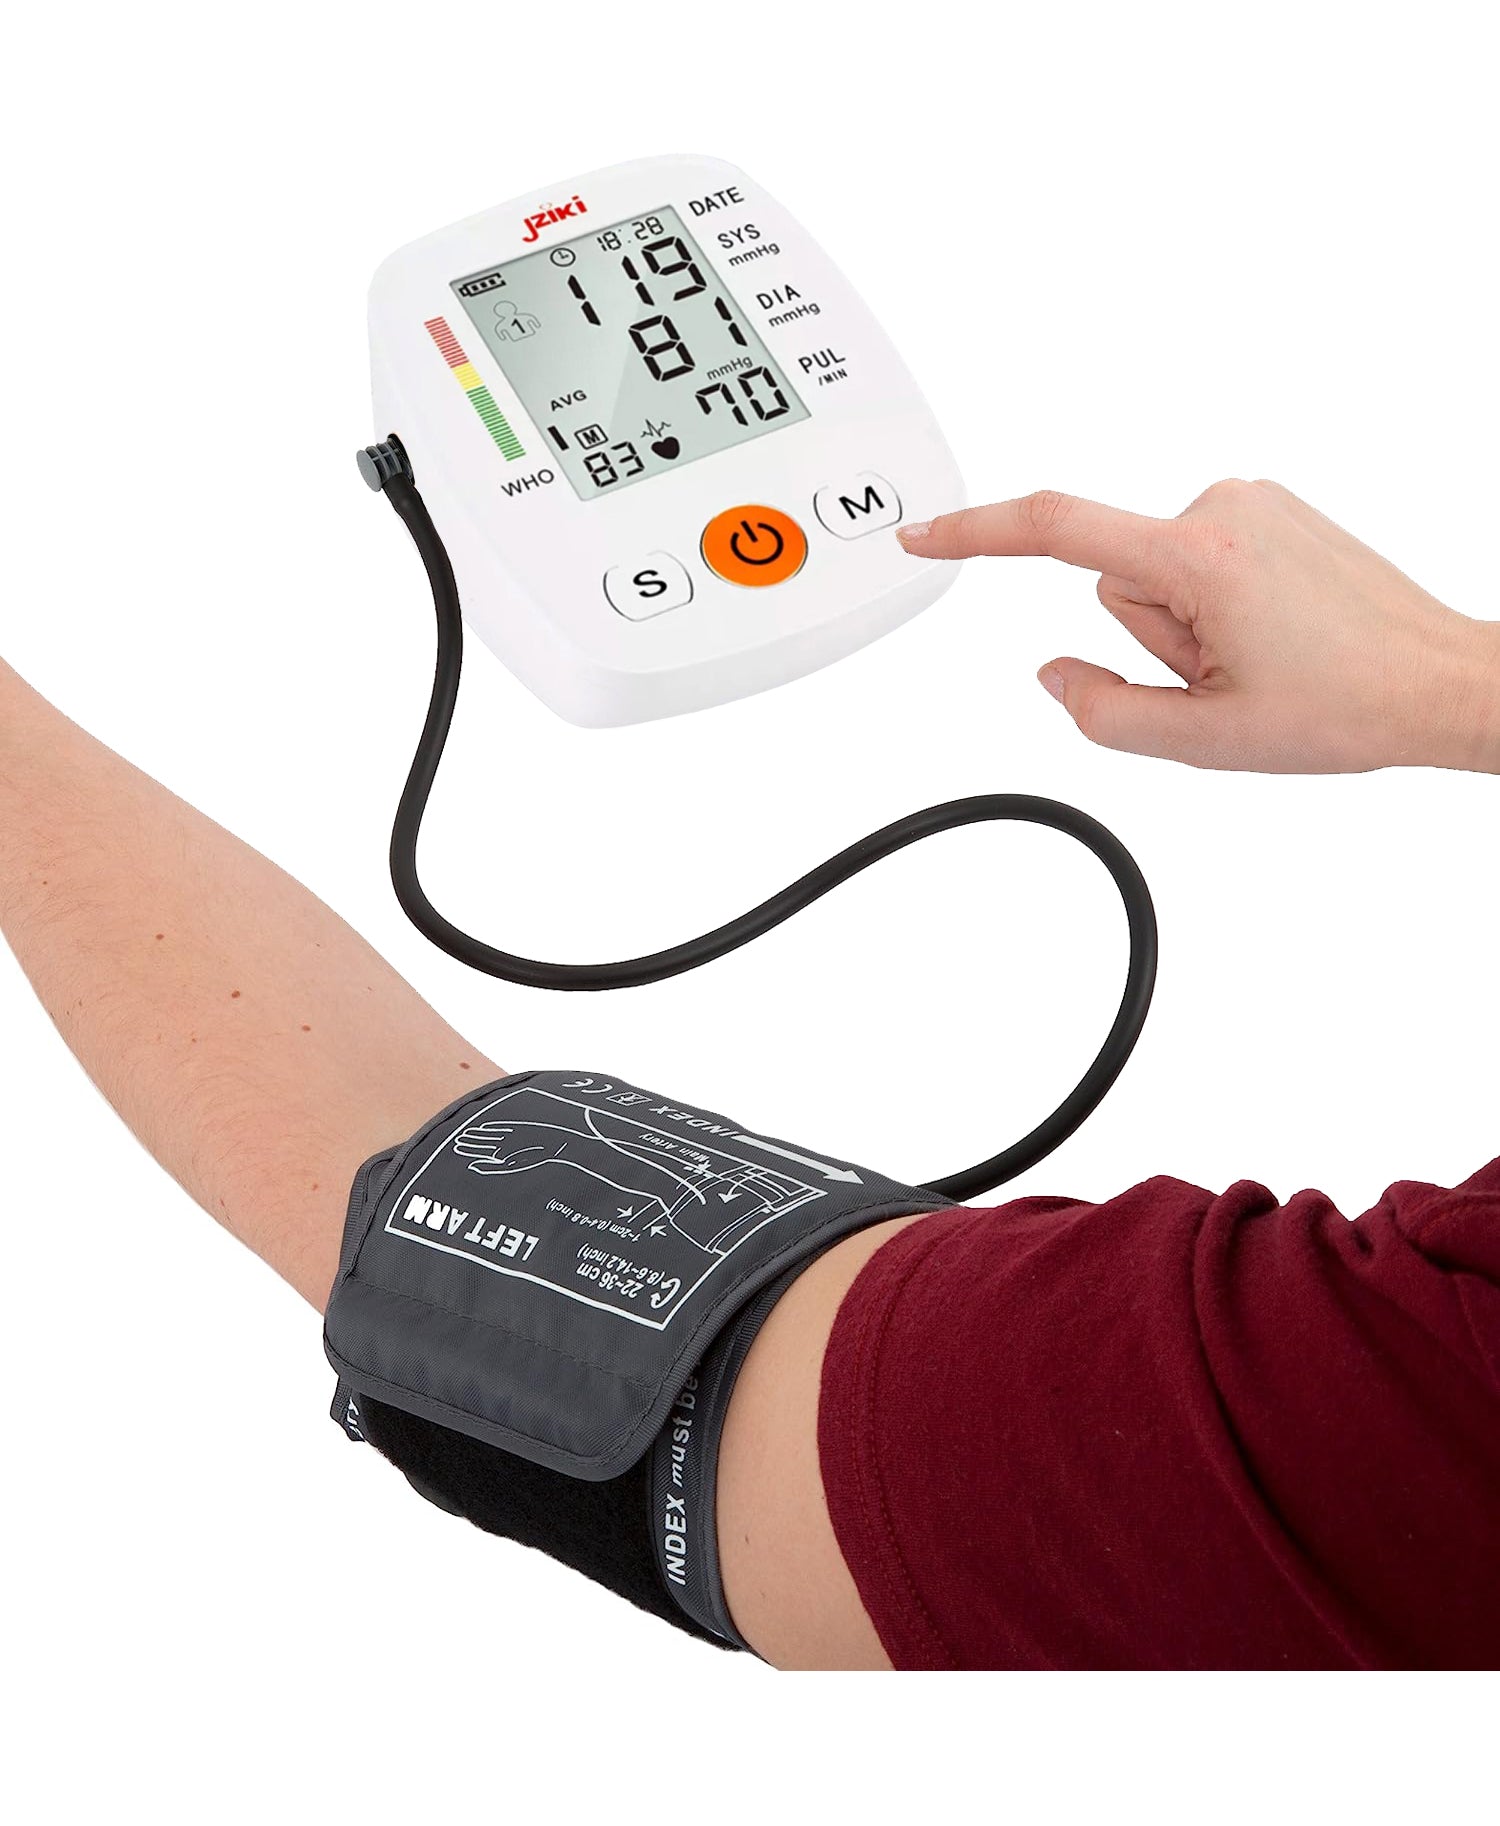 Digital Blood Pressure Monitor Portable And Arm Band - White